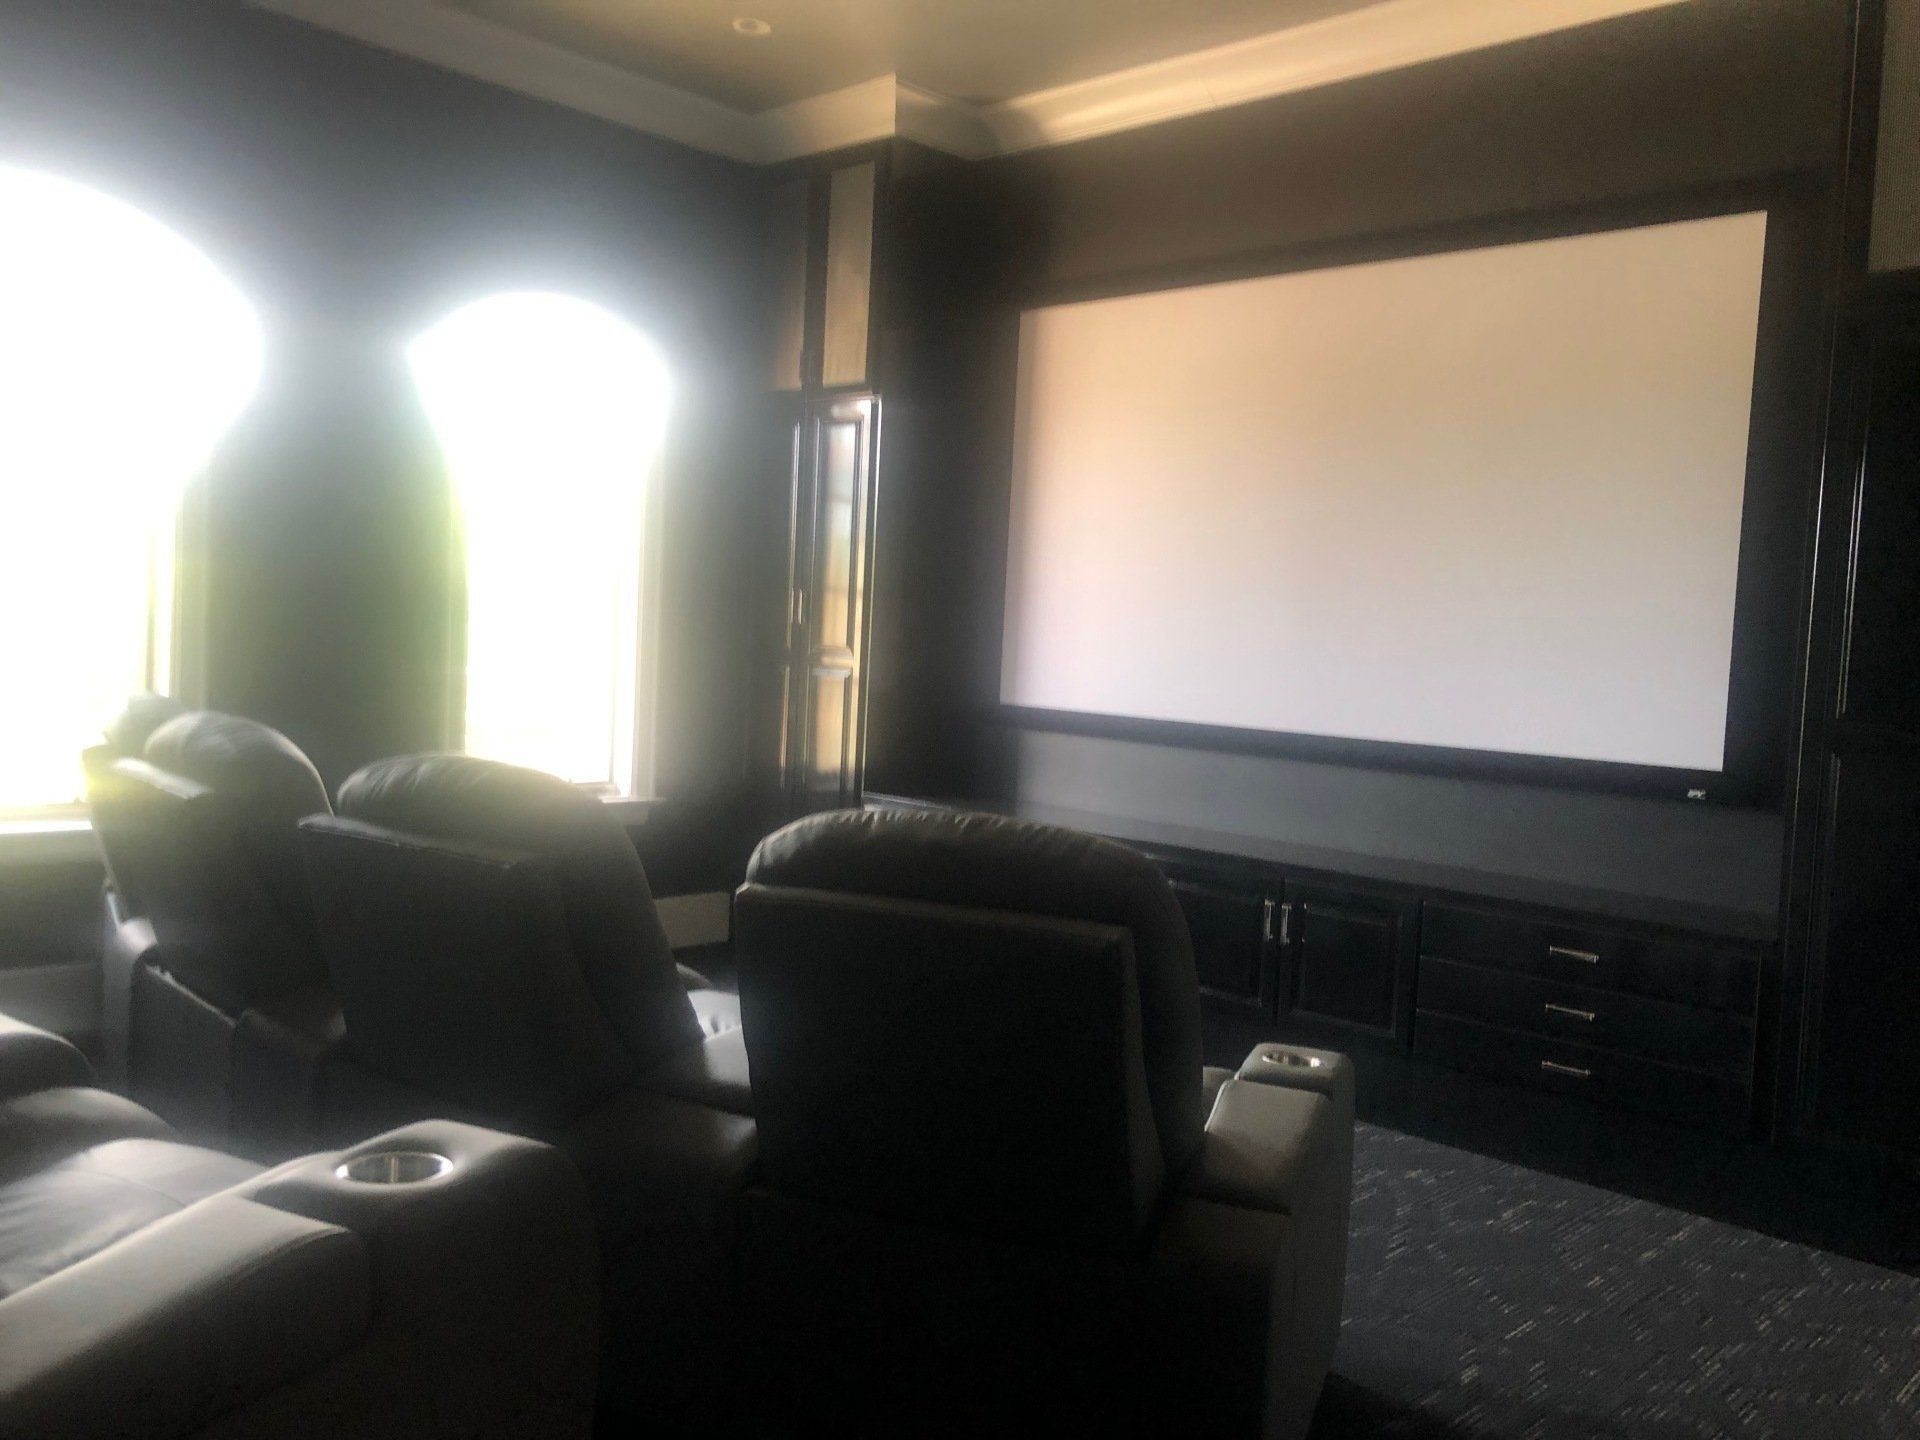 Home window tinting in Birmingham AL - SPF home window tinting service created the perfect setting in this home theatre in Birmngham AL